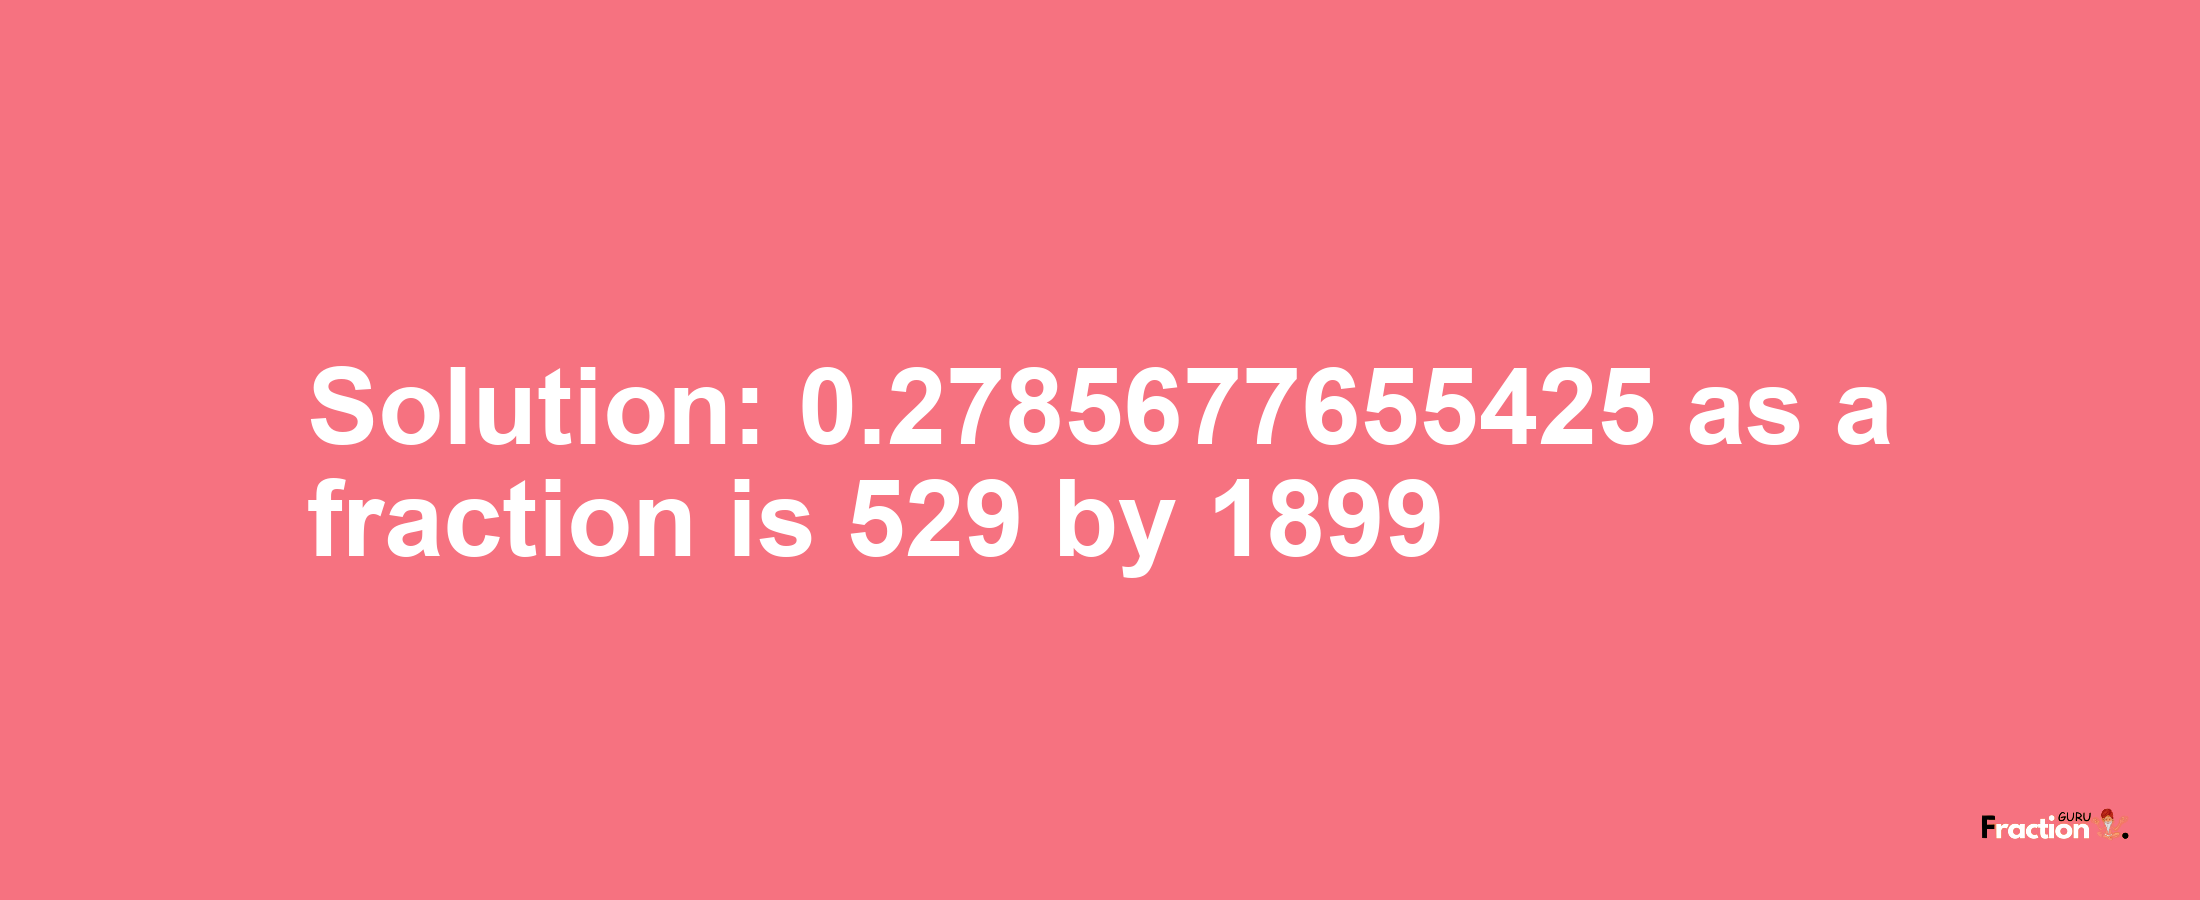 Solution:0.2785677655425 as a fraction is 529/1899